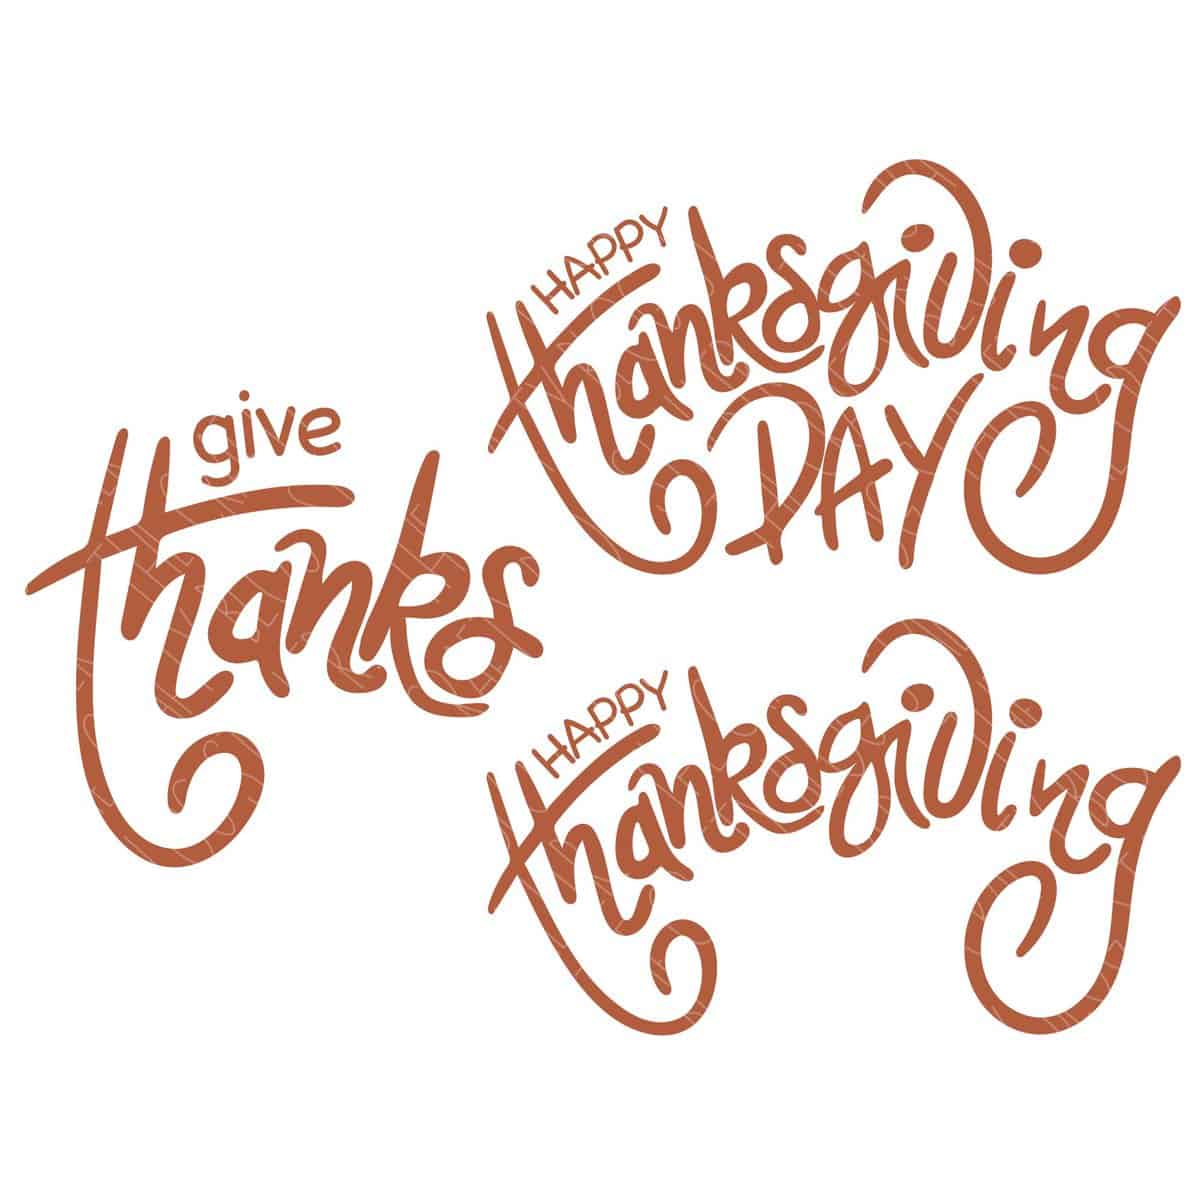 SVG Cut File Bundle: Give Thanks, Happy Thanksgiving Day.